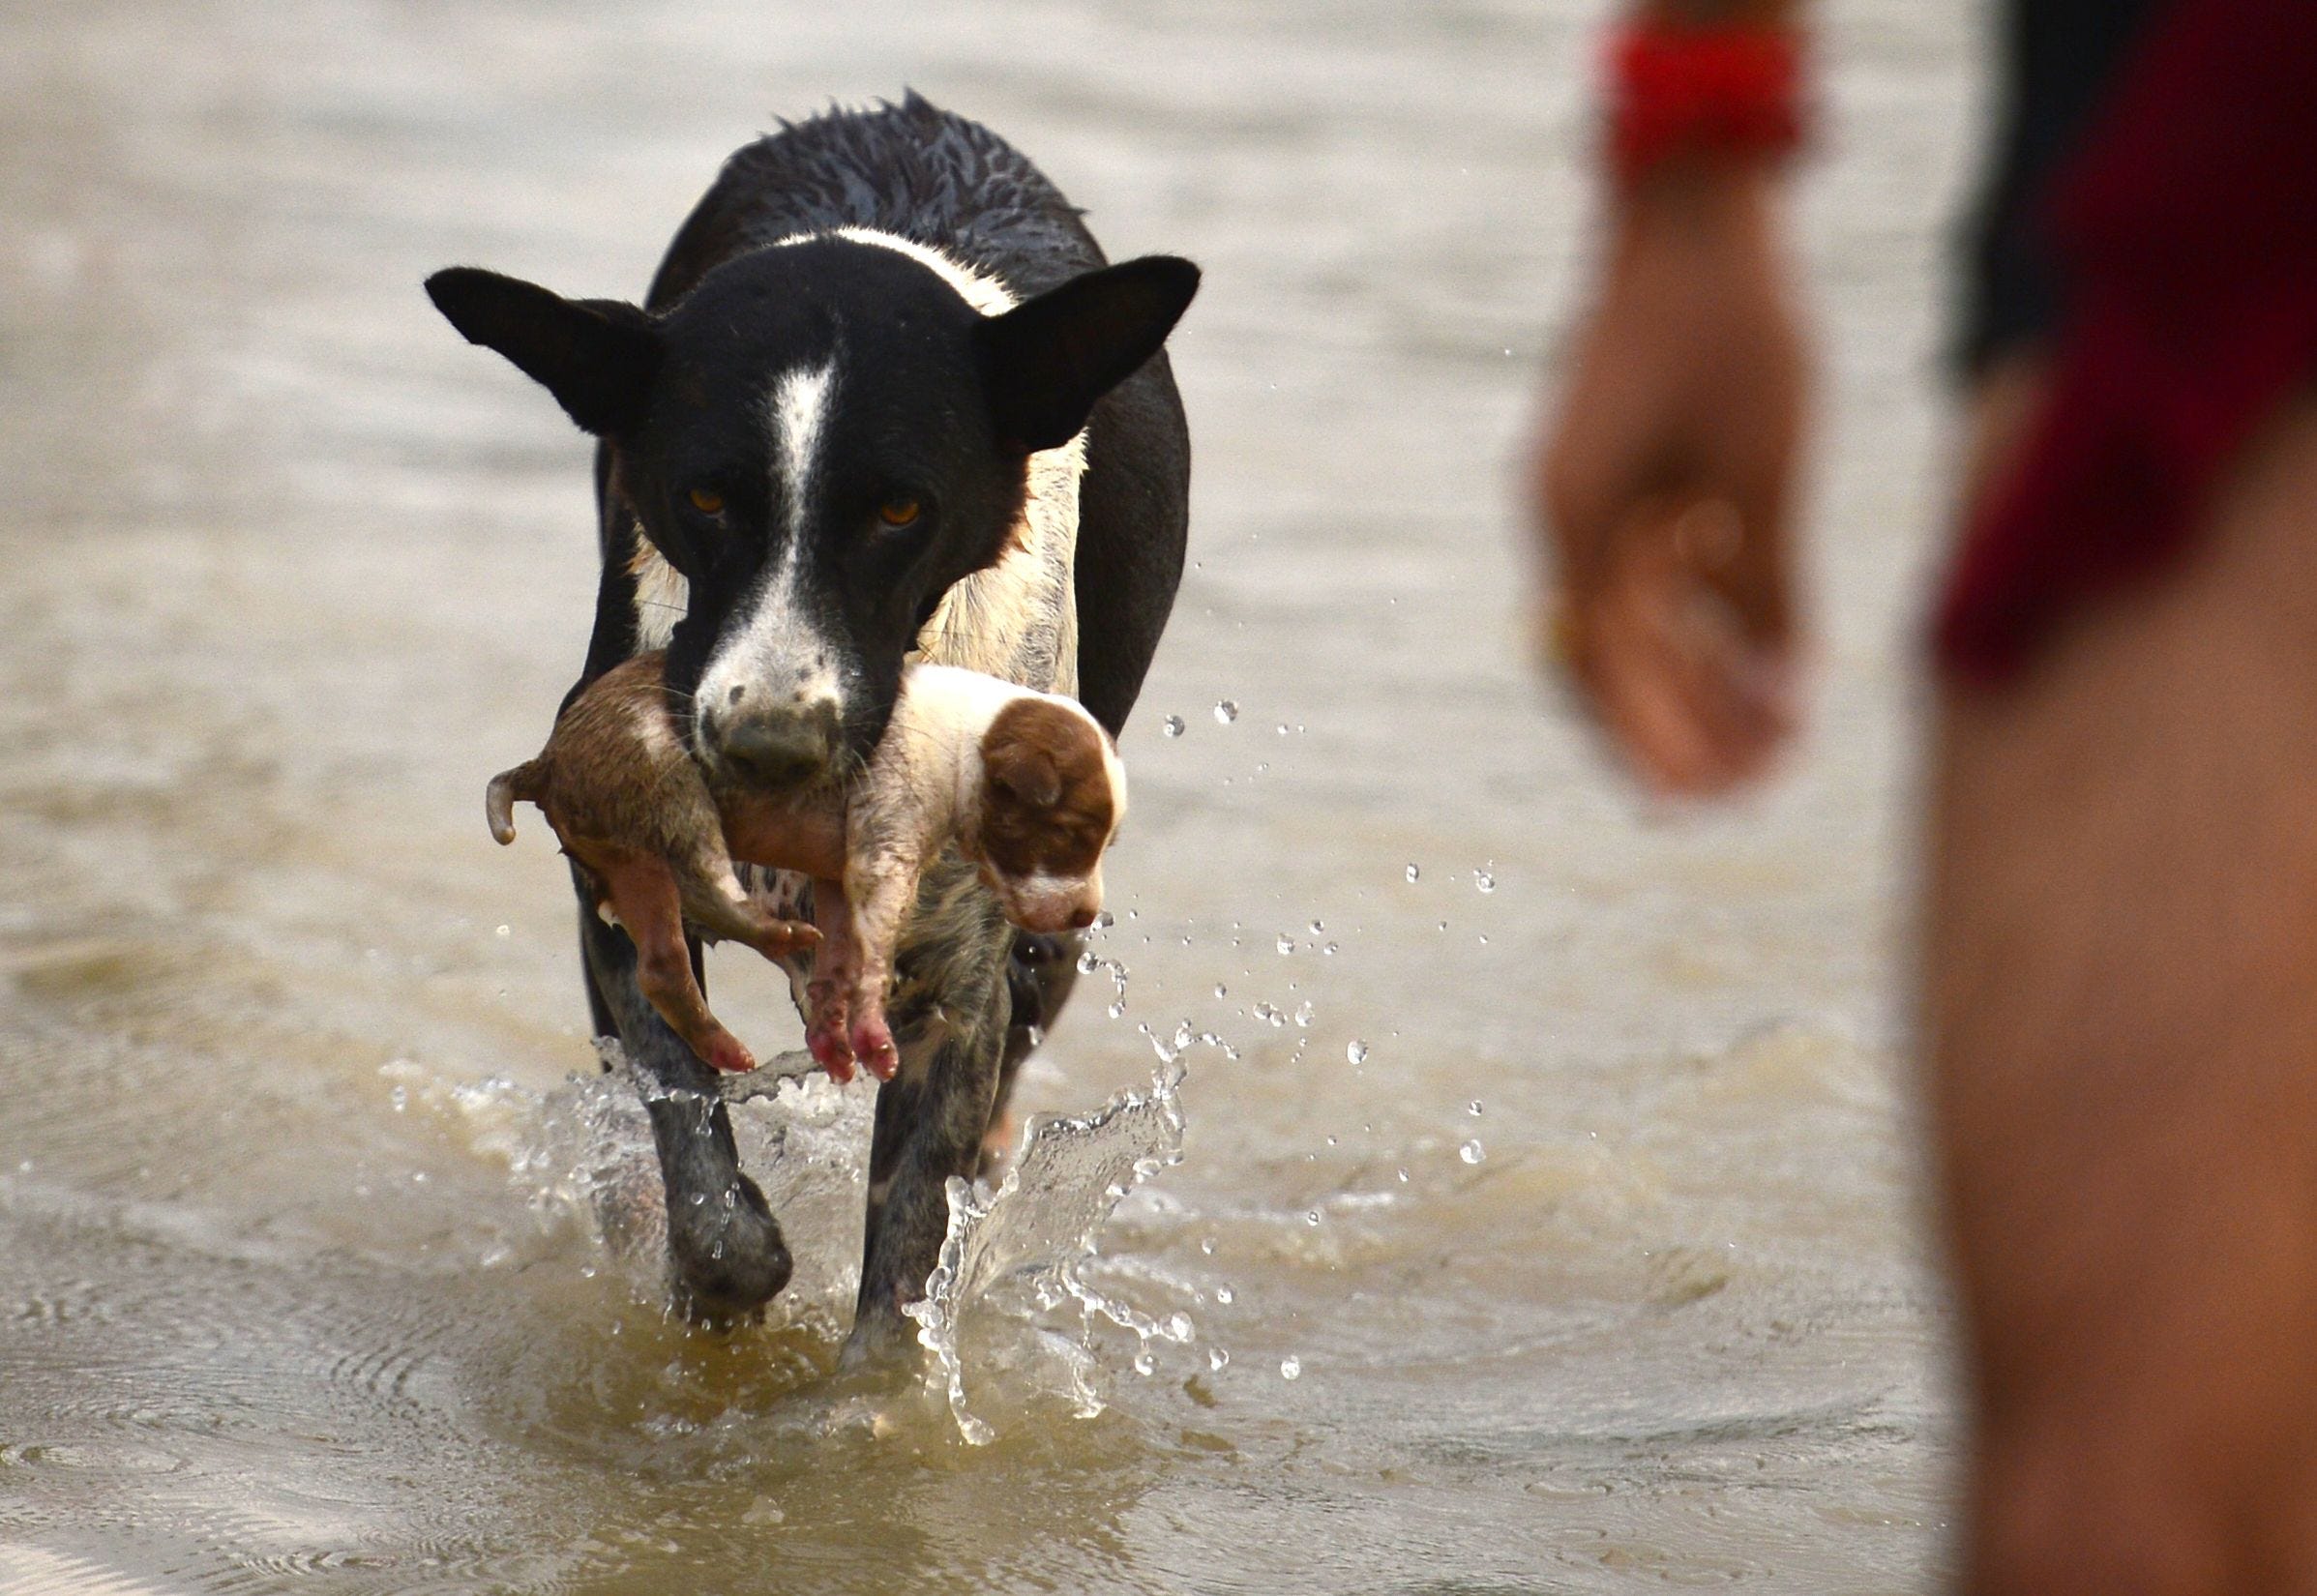 A dog transfers a puppy to a drier place at Sangam area in Allahabad on Sept. 3, 2018, as water levels of the Ganges and Yamuna rivers increase following monsoon rains.